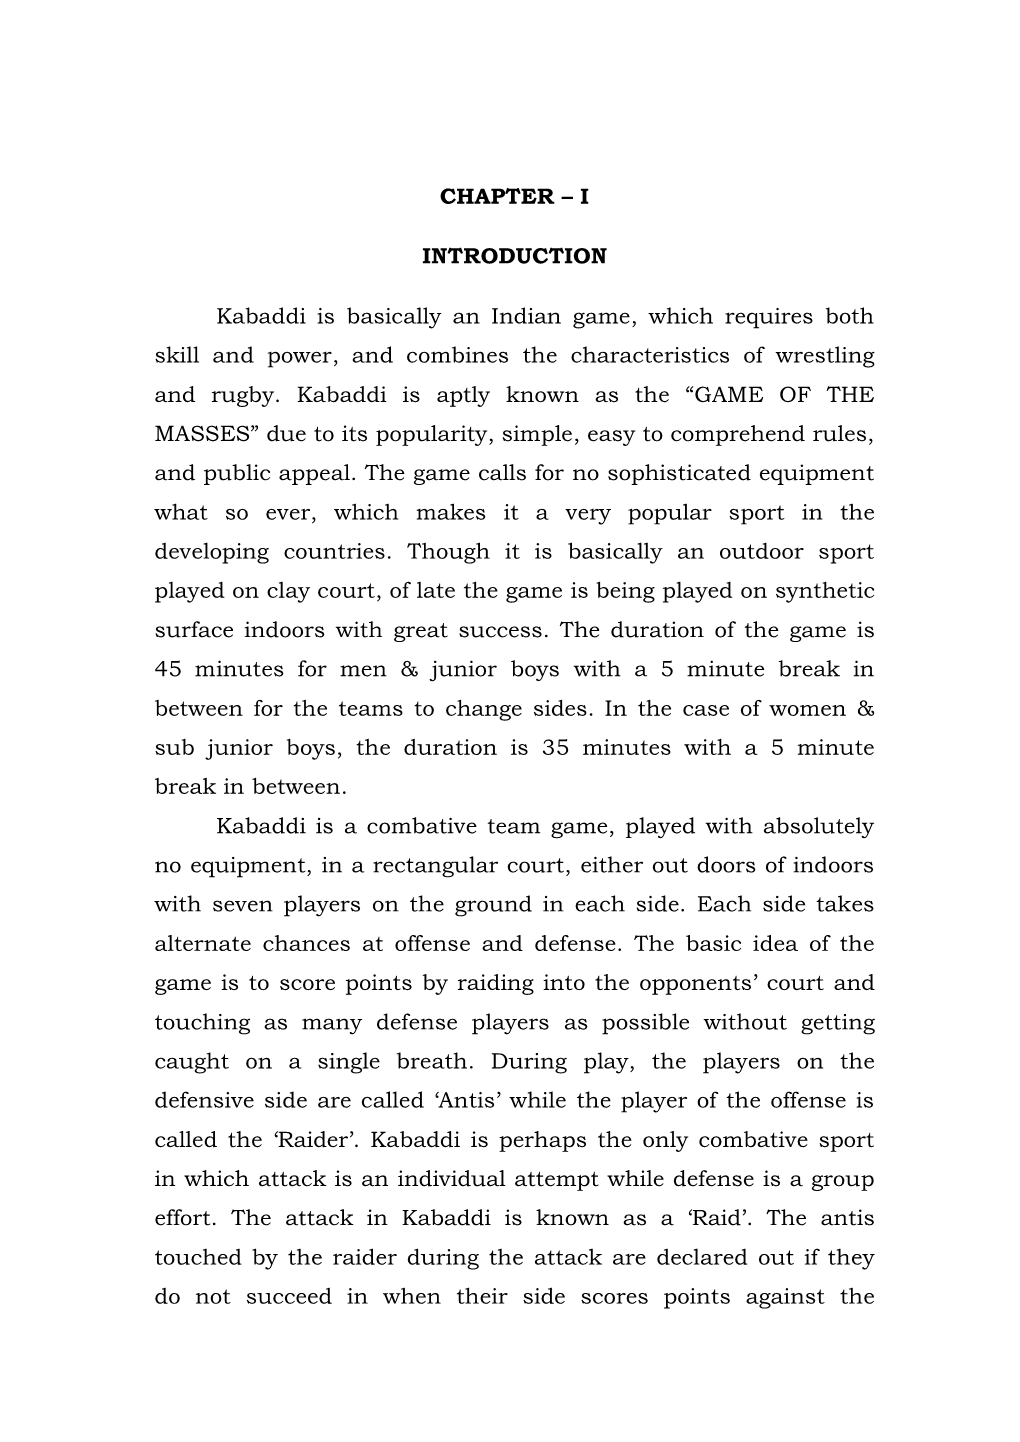 CHAPTER – I INTRODUCTION Kabaddi Is Basically an Indian Game, Which Requires Both Skill and Power, and Combines the Characteri